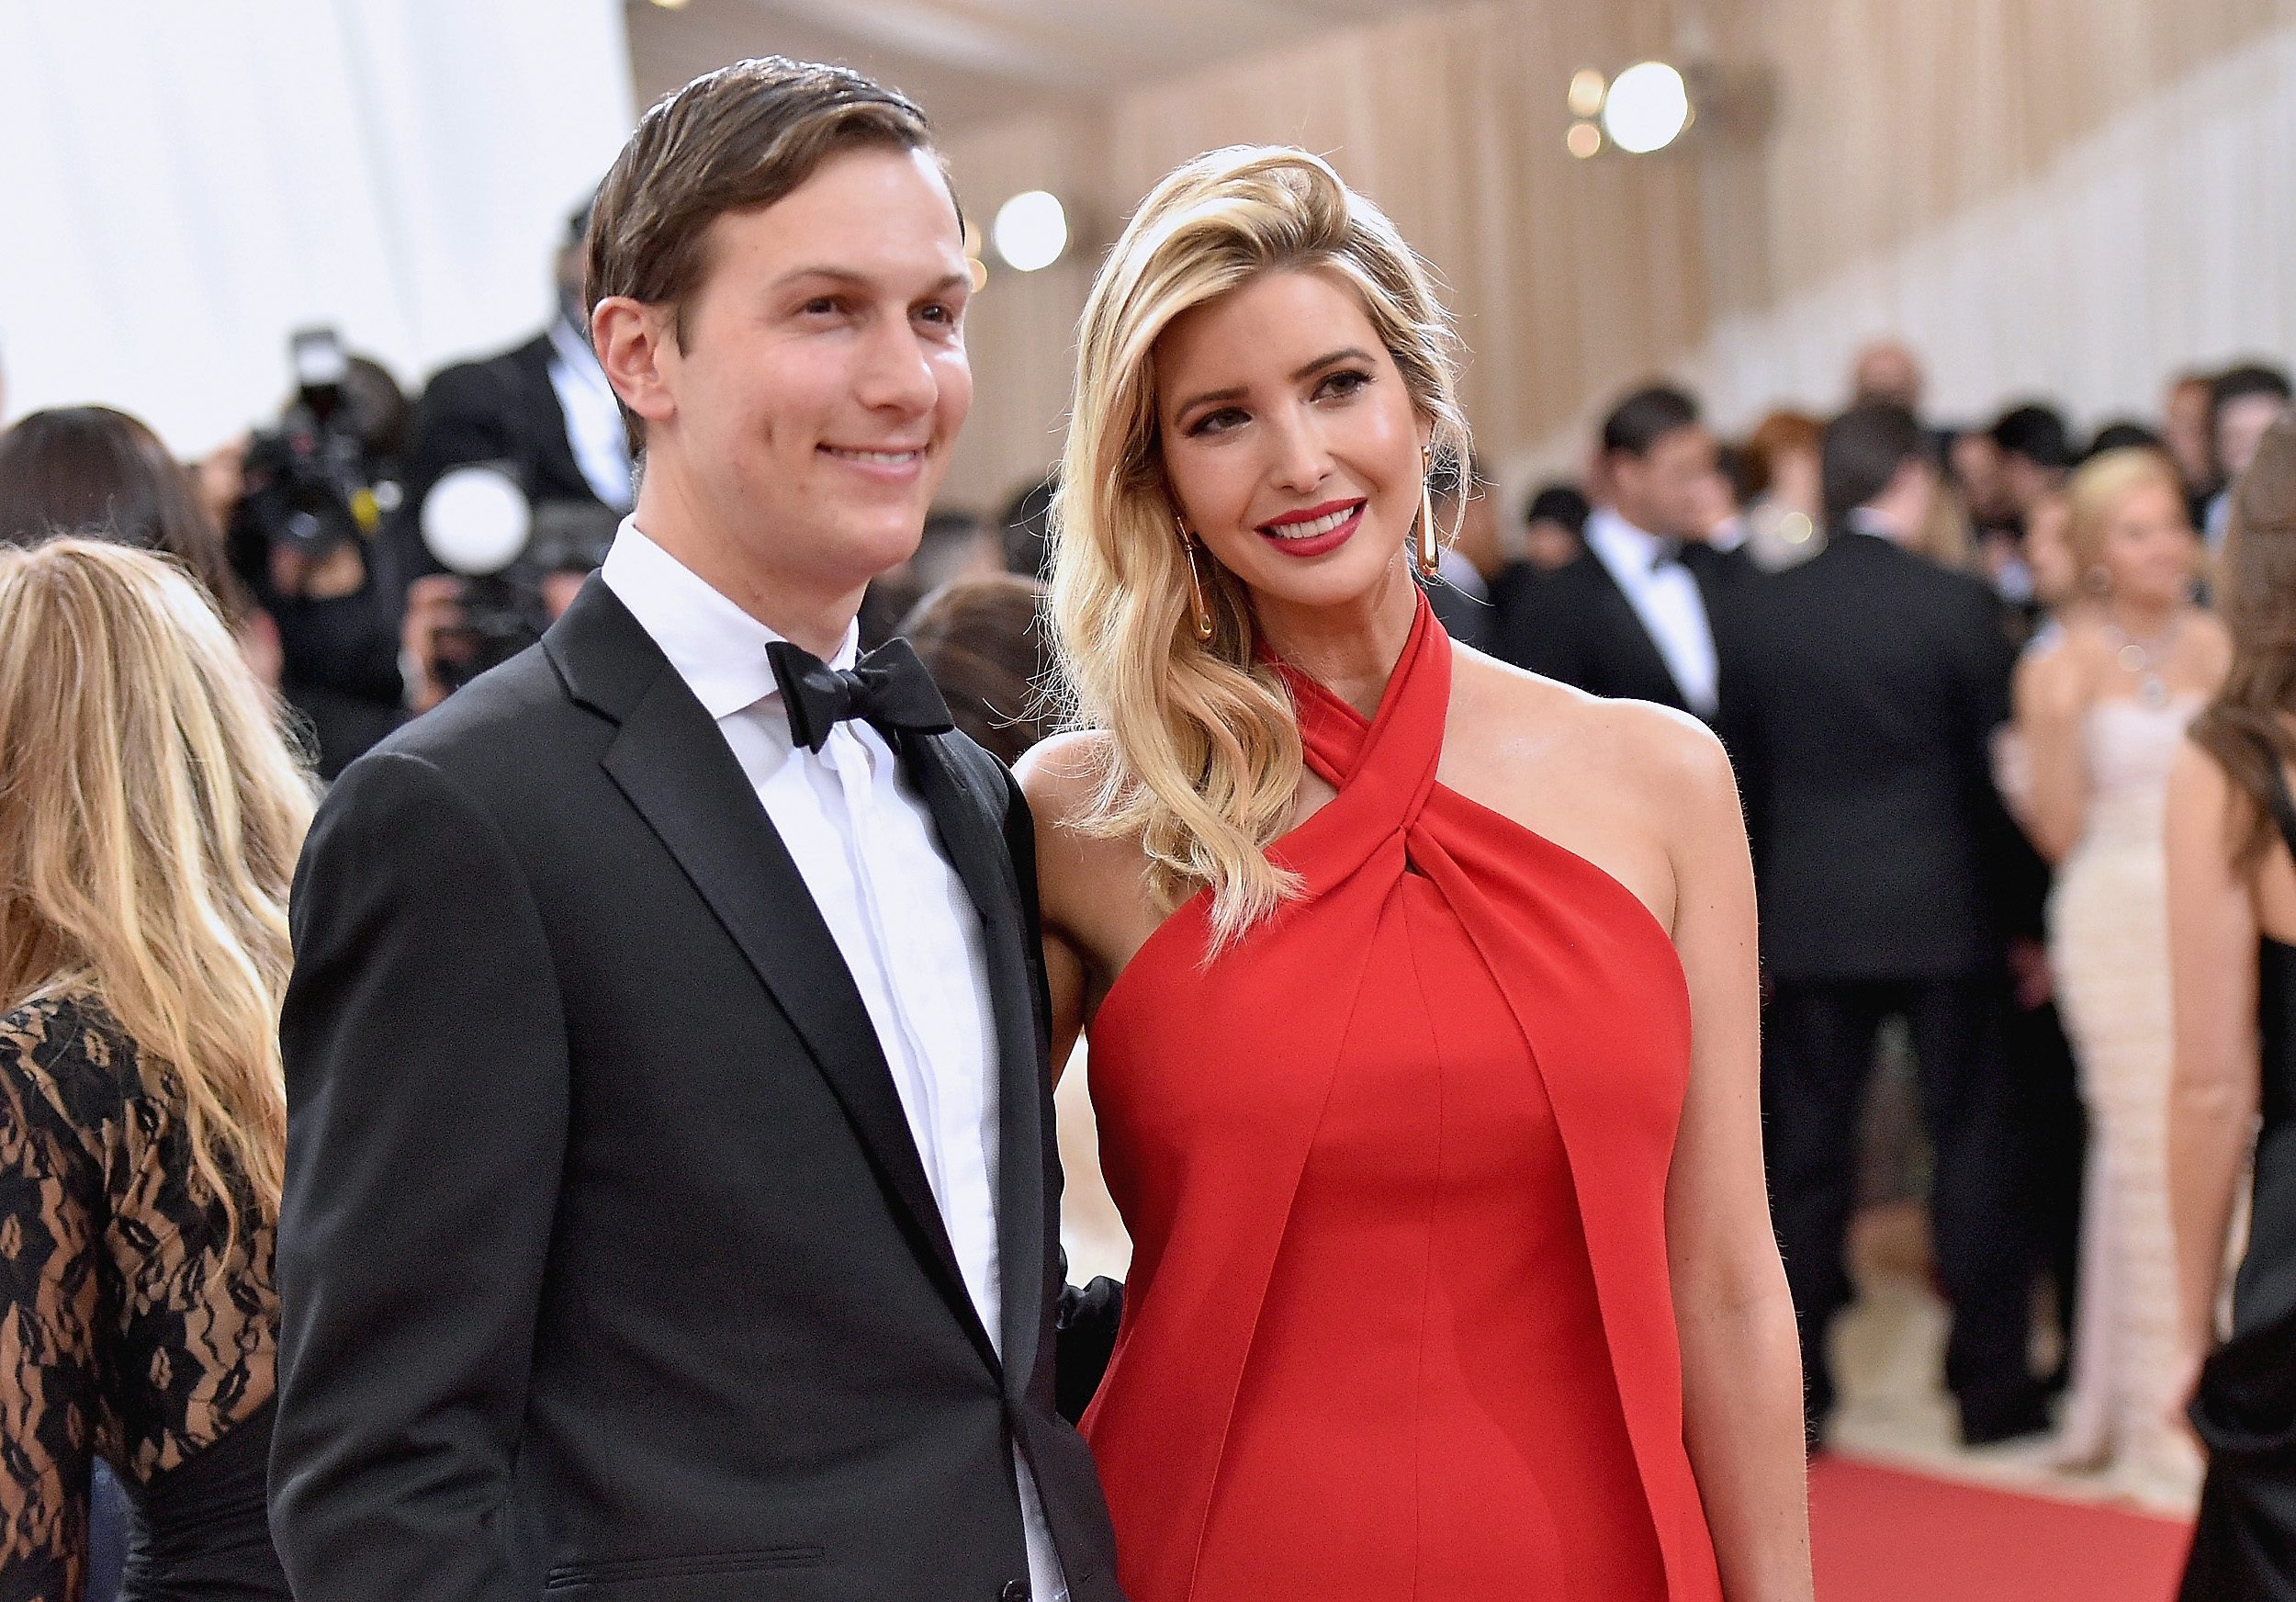 NEW YORK, NY - MAY 02: Jared Kushner and wife  Ivanka Trump attend the "Manus x Machina: Fashion In An Age Of Technology" Costume Institute Gala at Metropolitan Museum of Art on May 2, 2016 in New York City.  (Photo by Mike Coppola/Getty Images for People.com) (Mike Coppola&mdash;People.com/Getty Images)